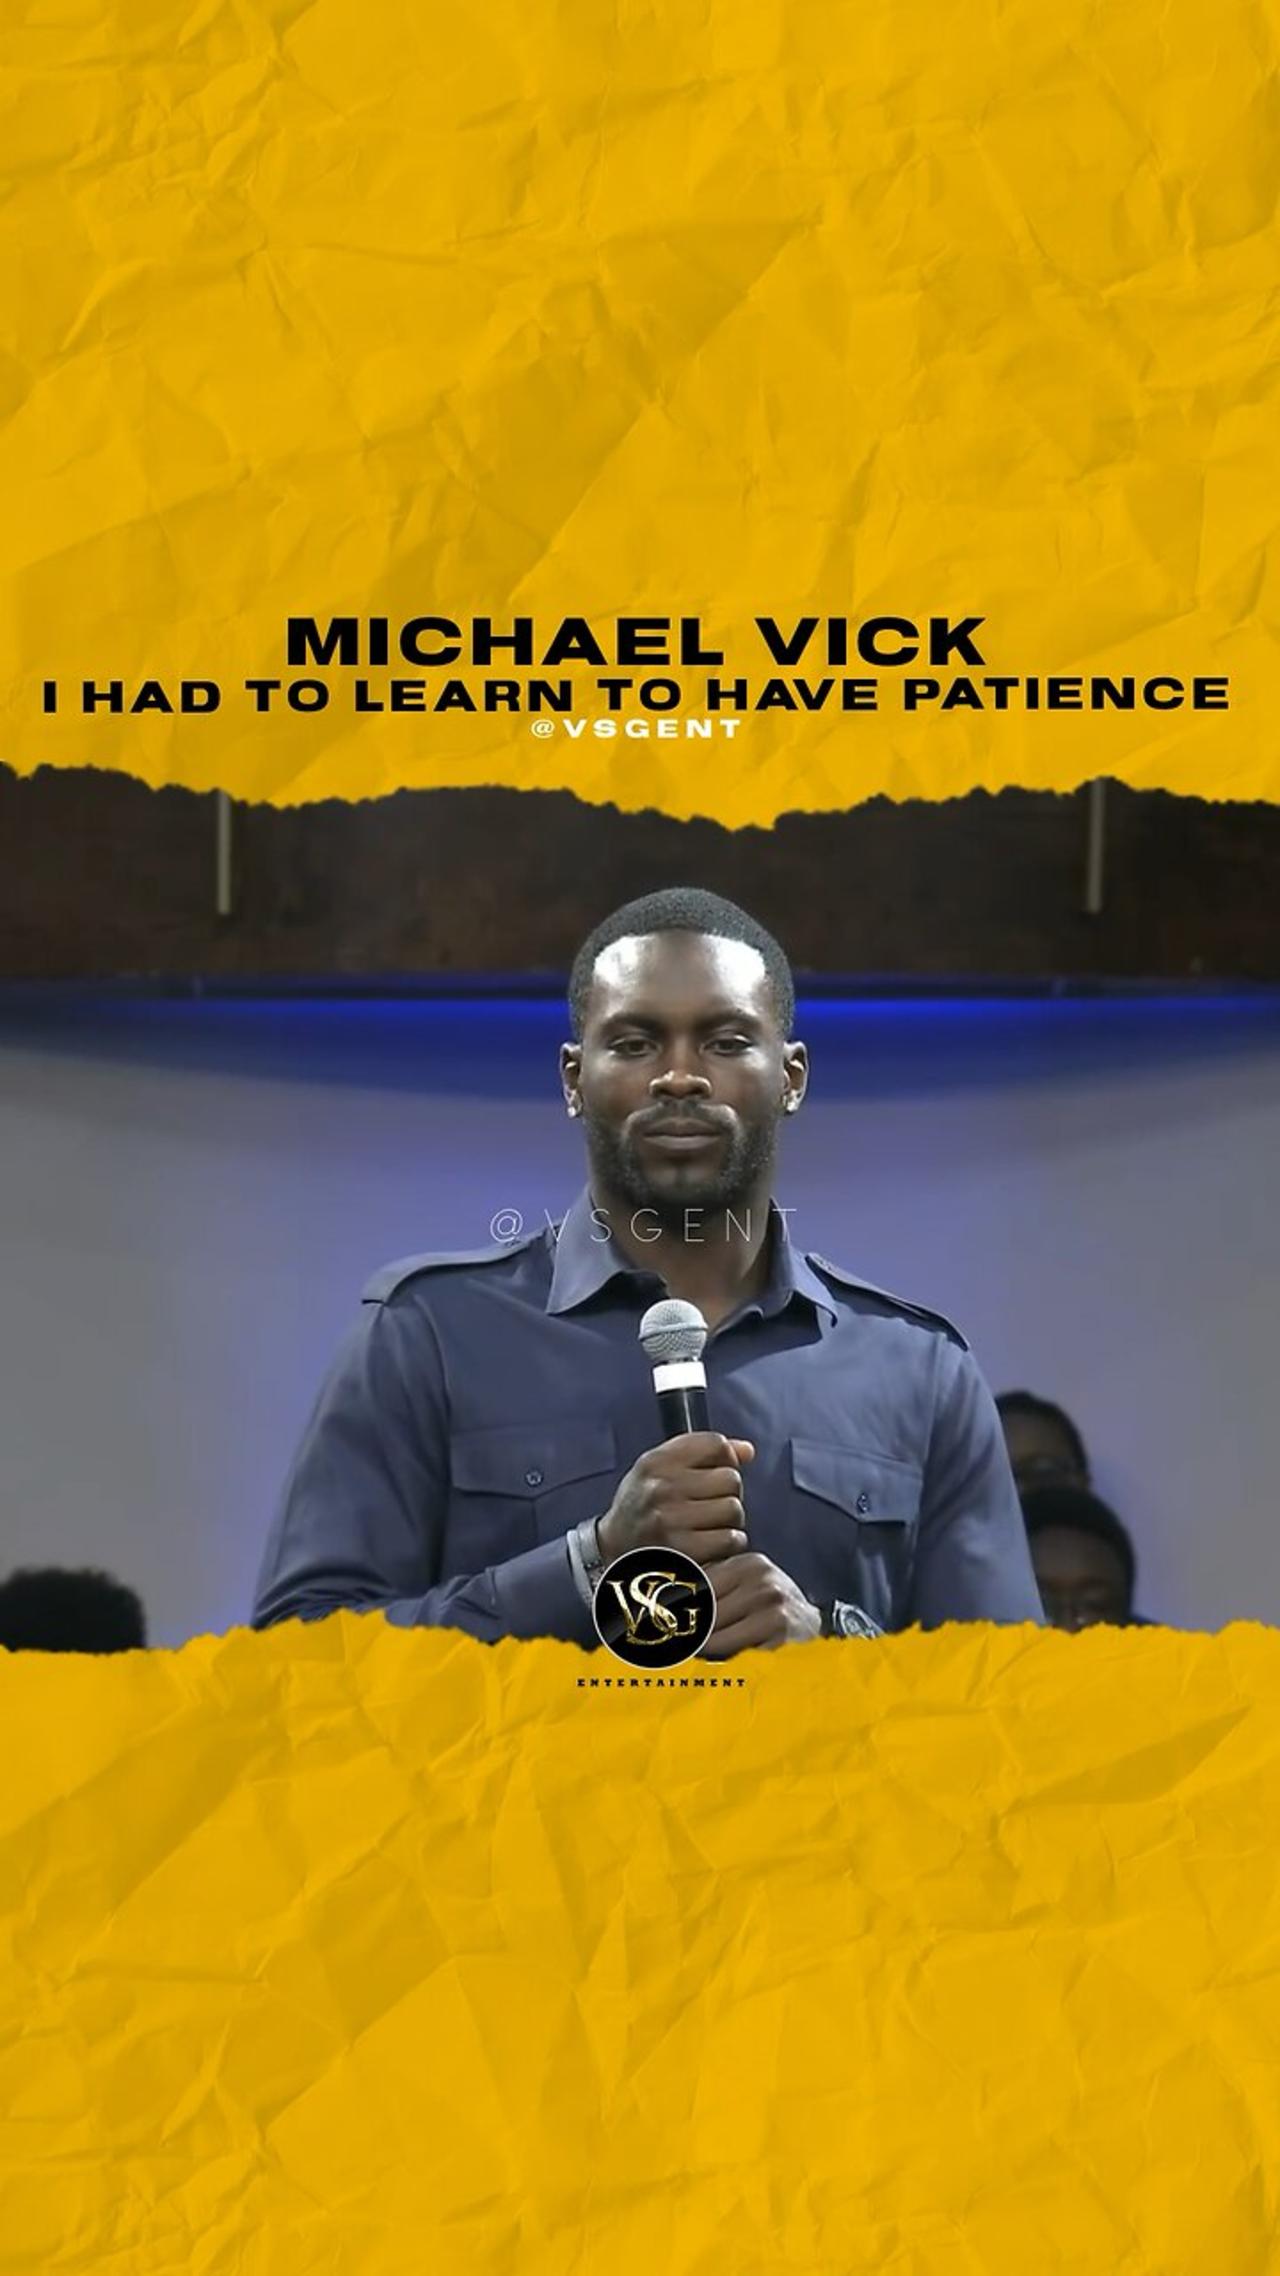 @mikevick I had to learn to have patience. #mikevick  🎥 @oakwoodsda